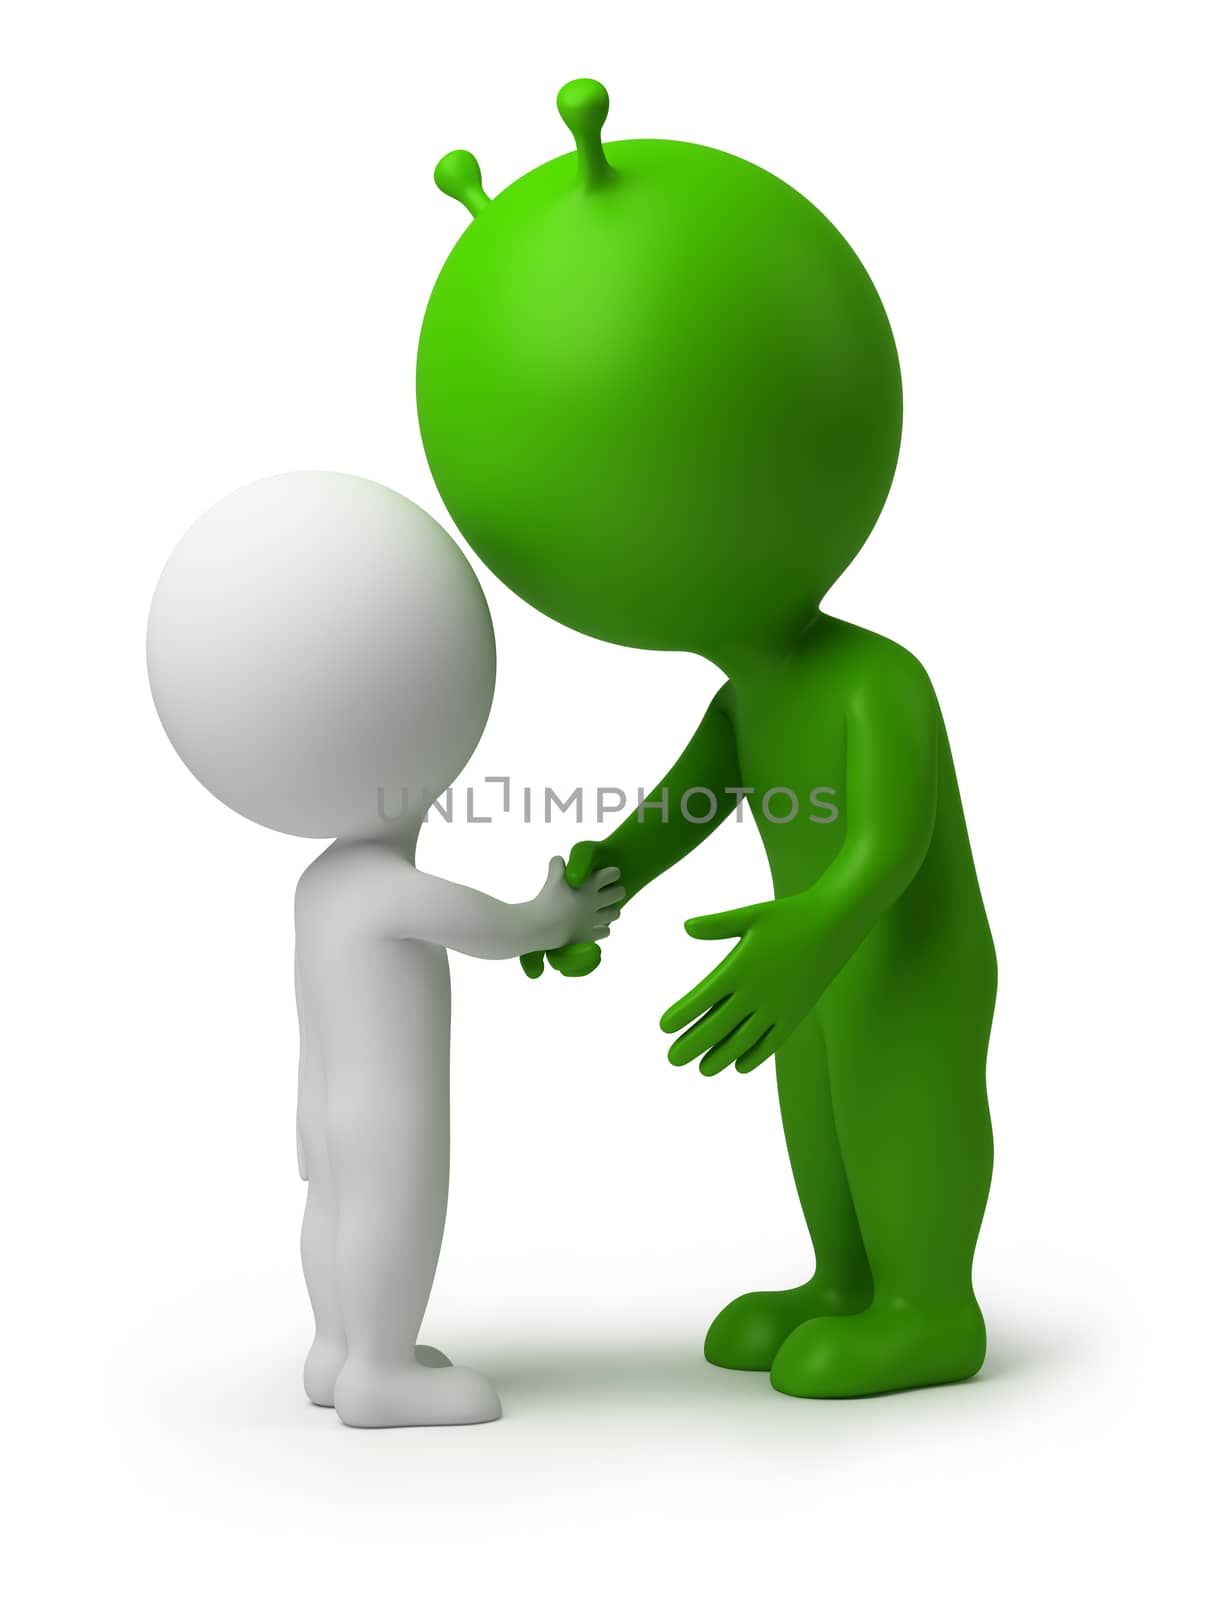 3d small person shaking hands the alien. 3d image. Isolated white background.